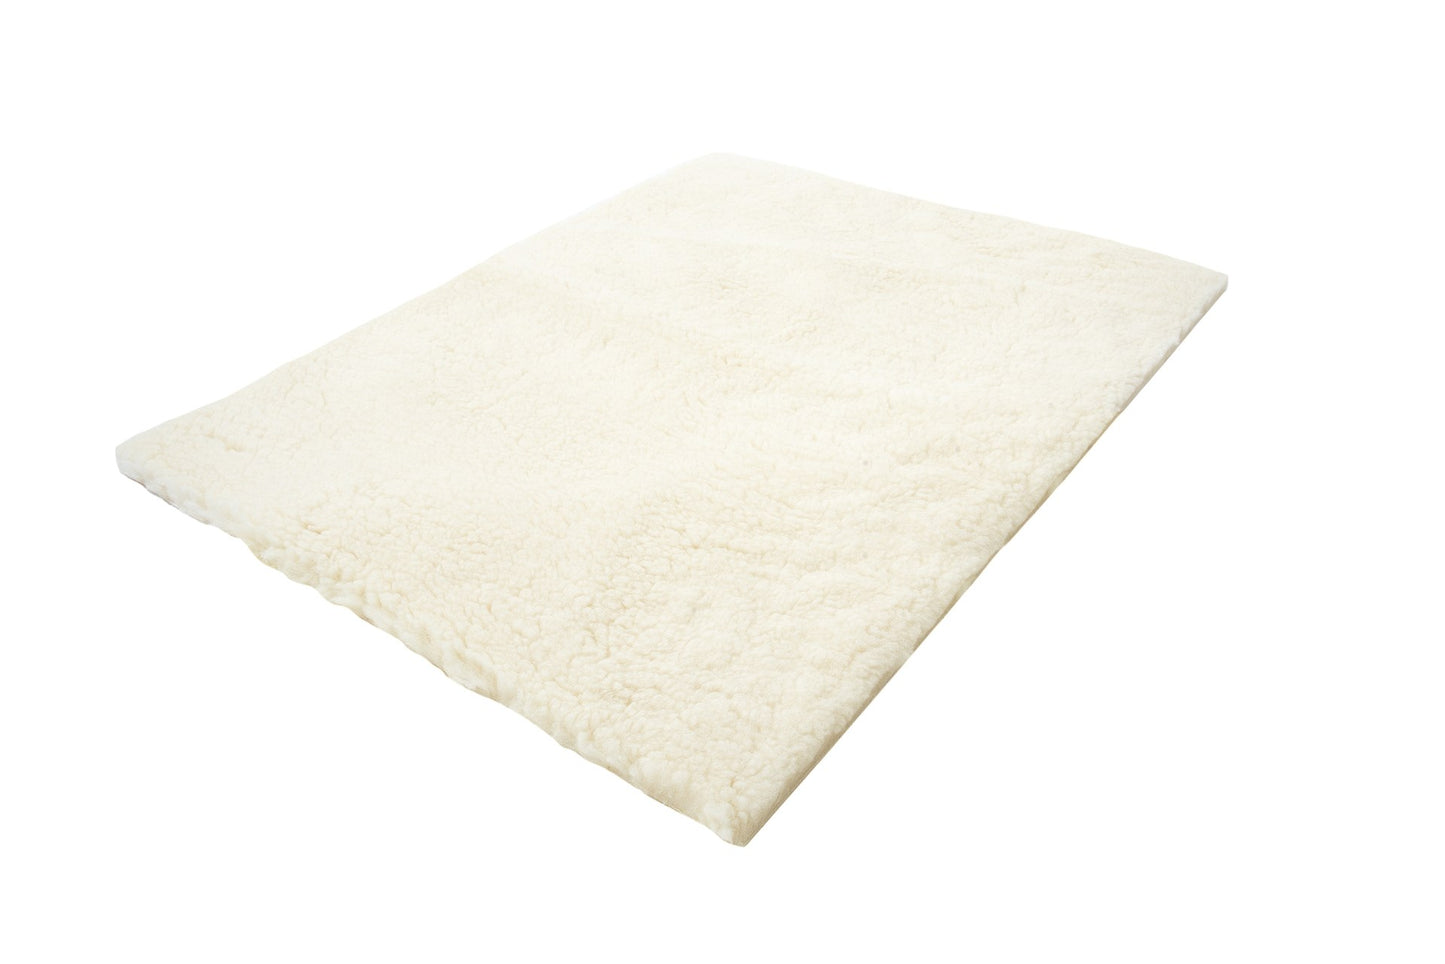 Sheepette Synthetic Lambskin Bed Pad - 30" x 40"